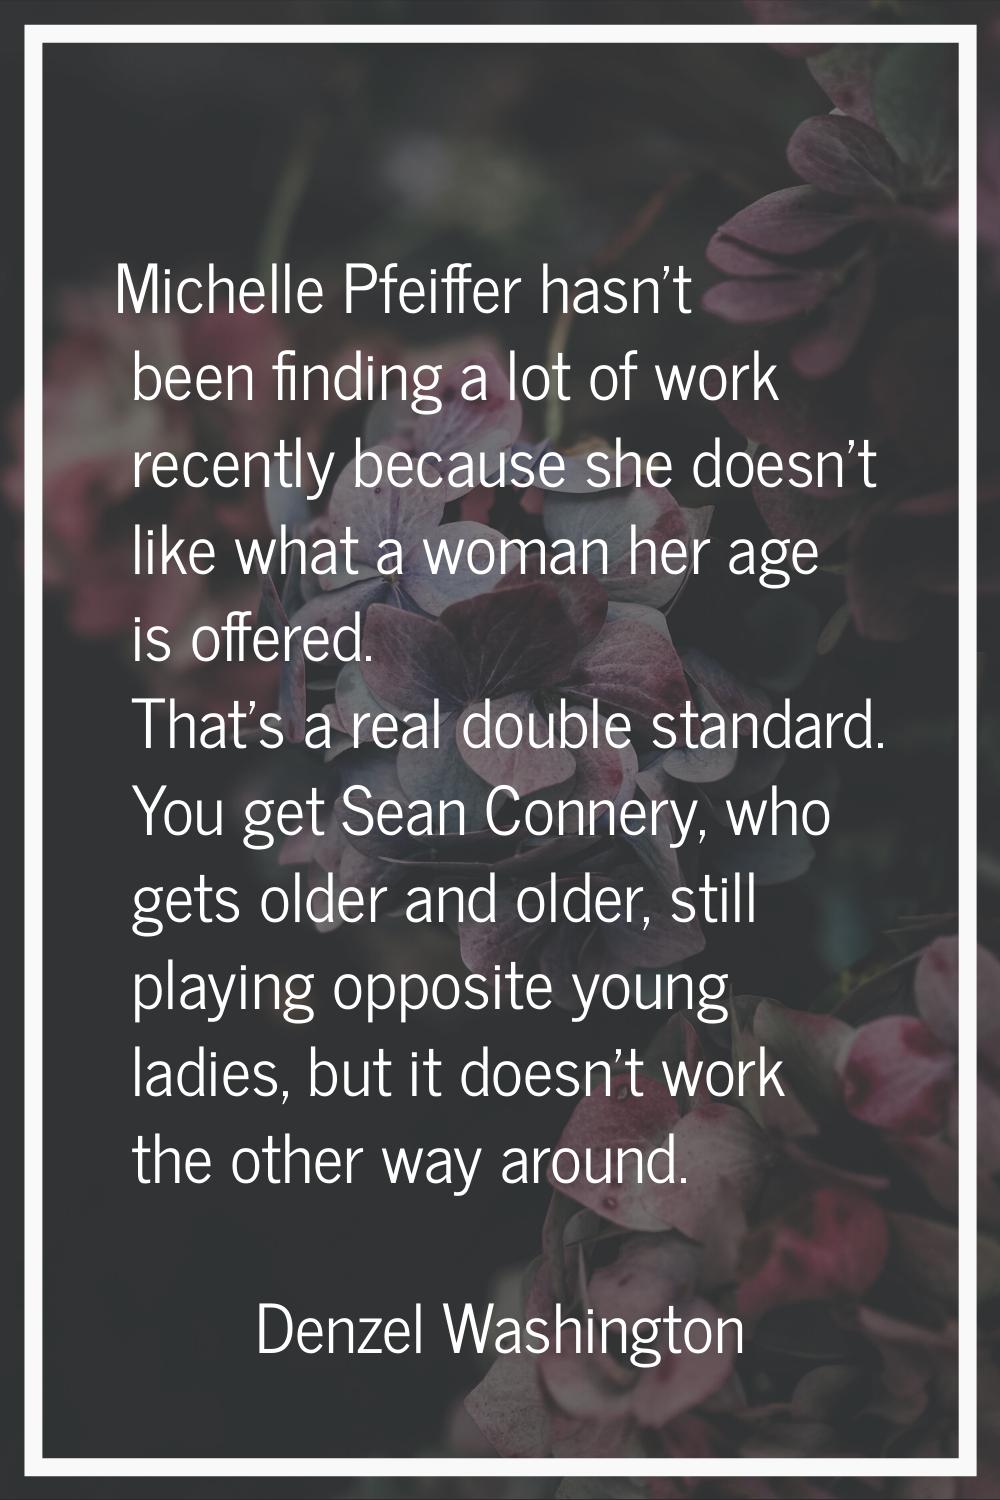 Michelle Pfeiffer hasn't been finding a lot of work recently because she doesn't like what a woman 